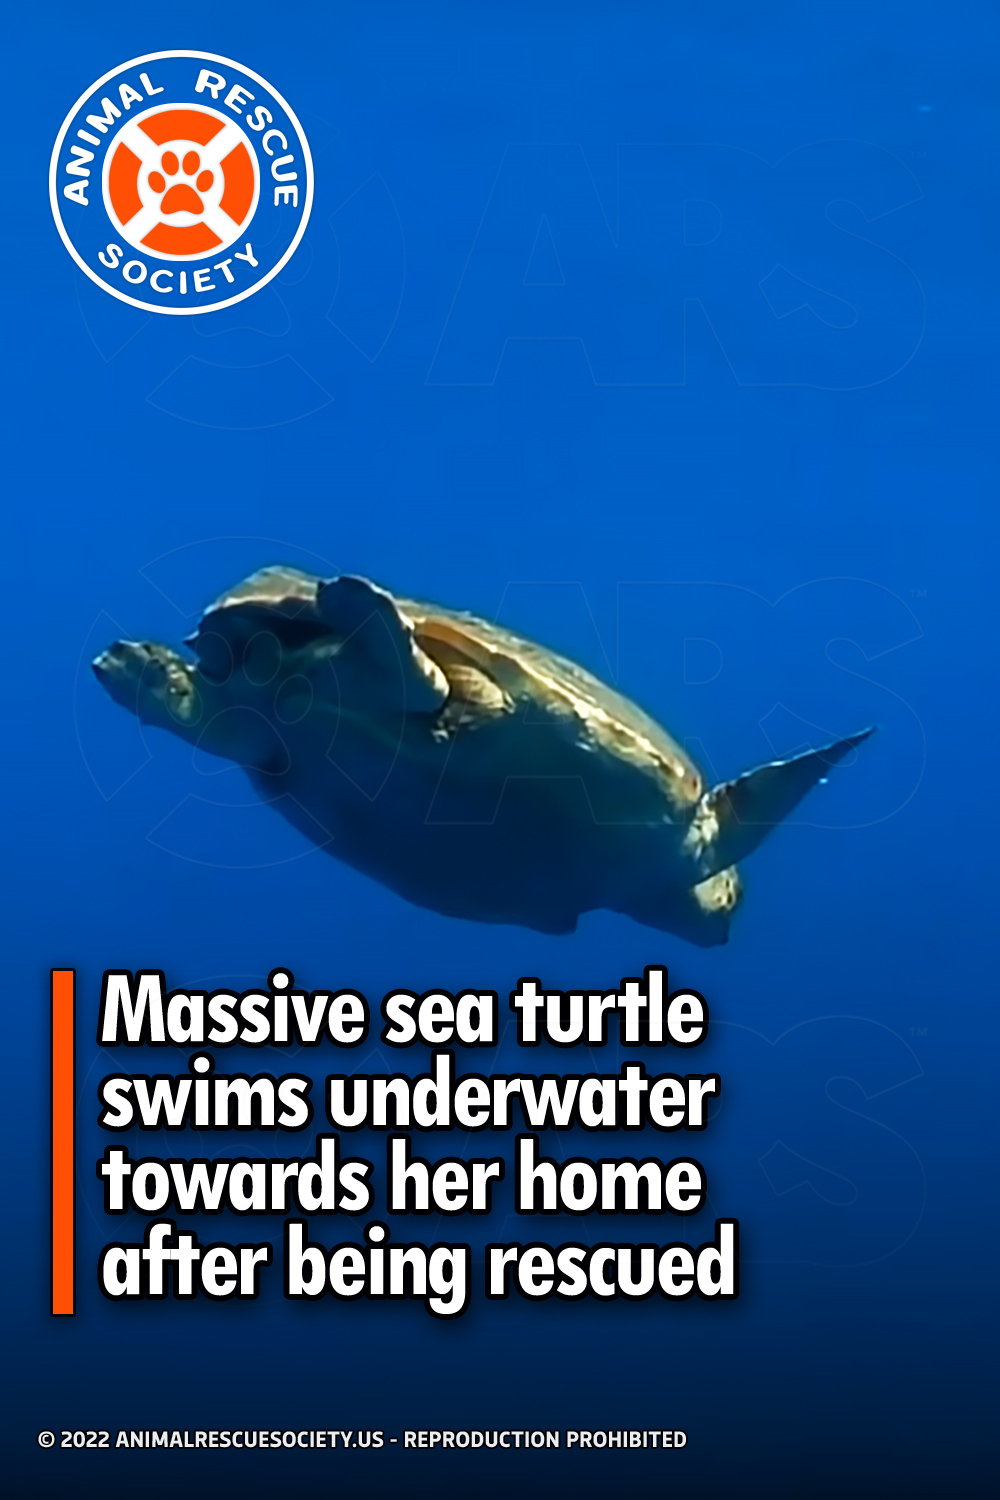 Massive sea turtle swims underwater towards her home after being rescued